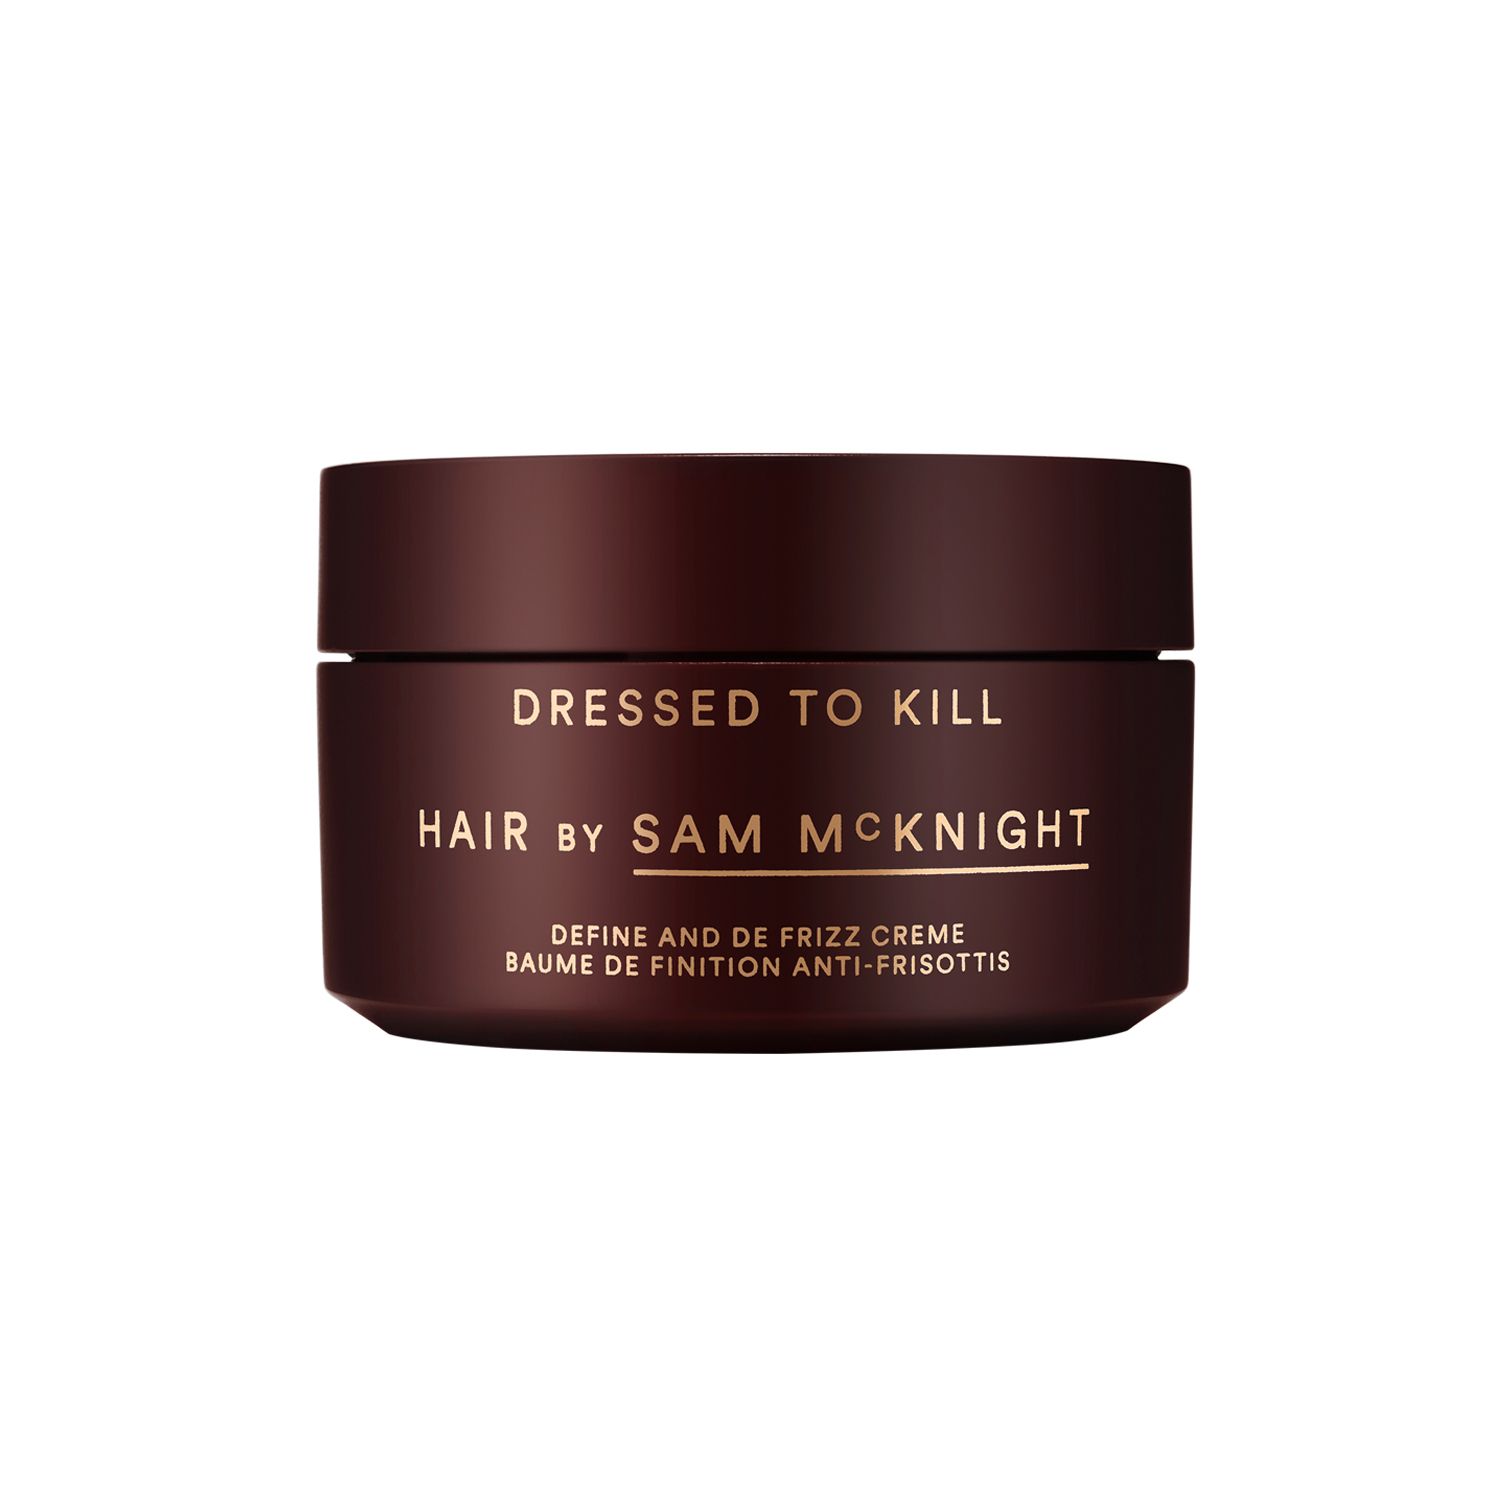 Dressed to Kill Defrizz Crème | Space NK - UK